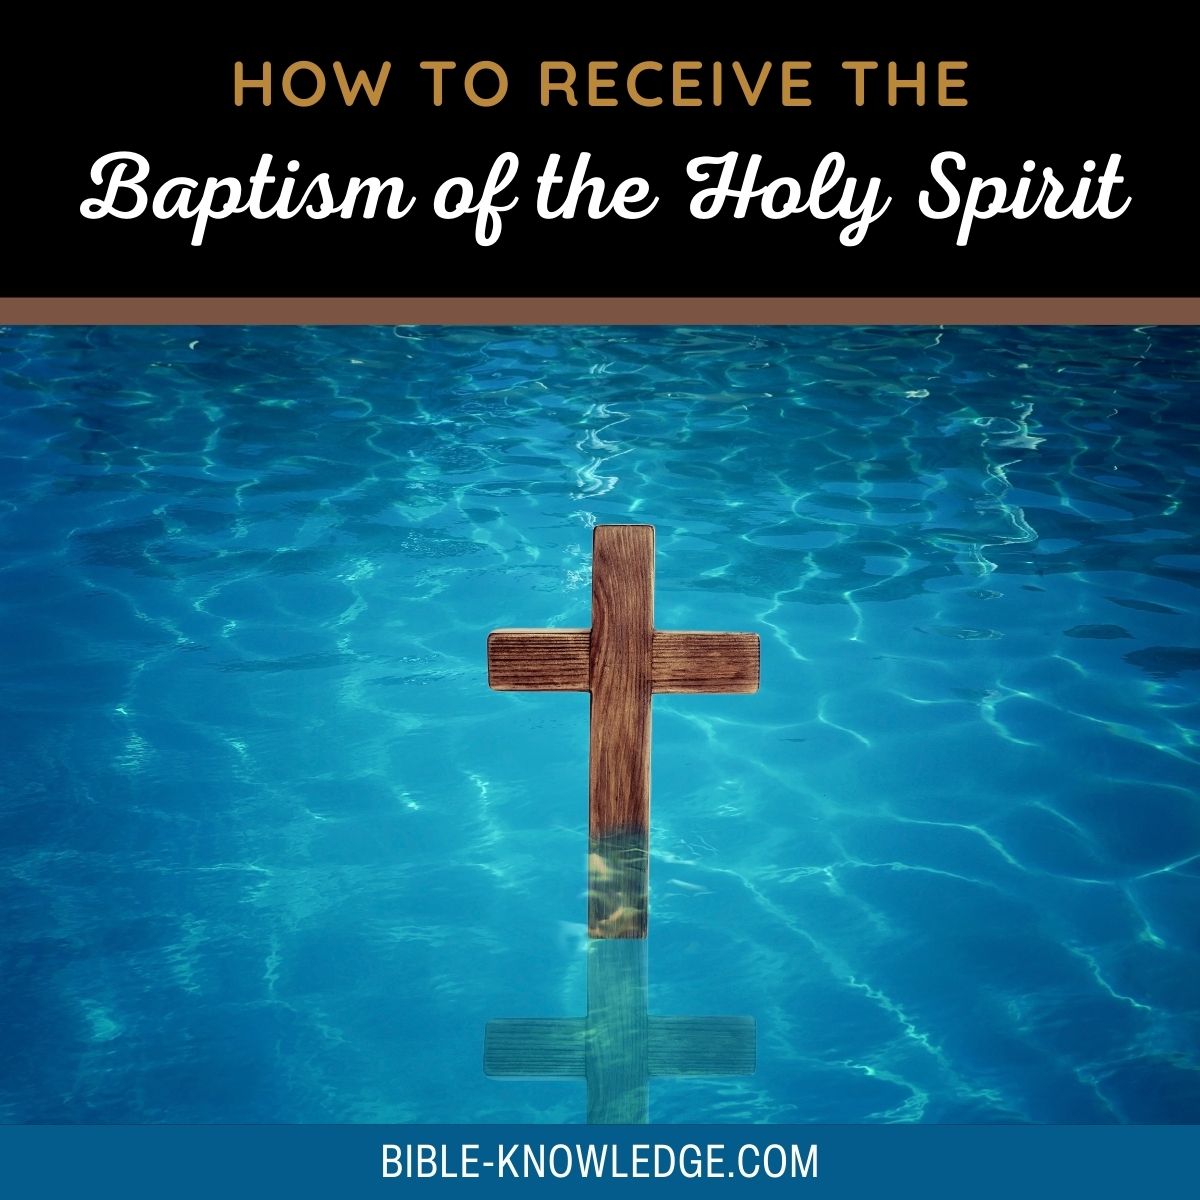 How to Receive The Baptism of the Holy Spirit